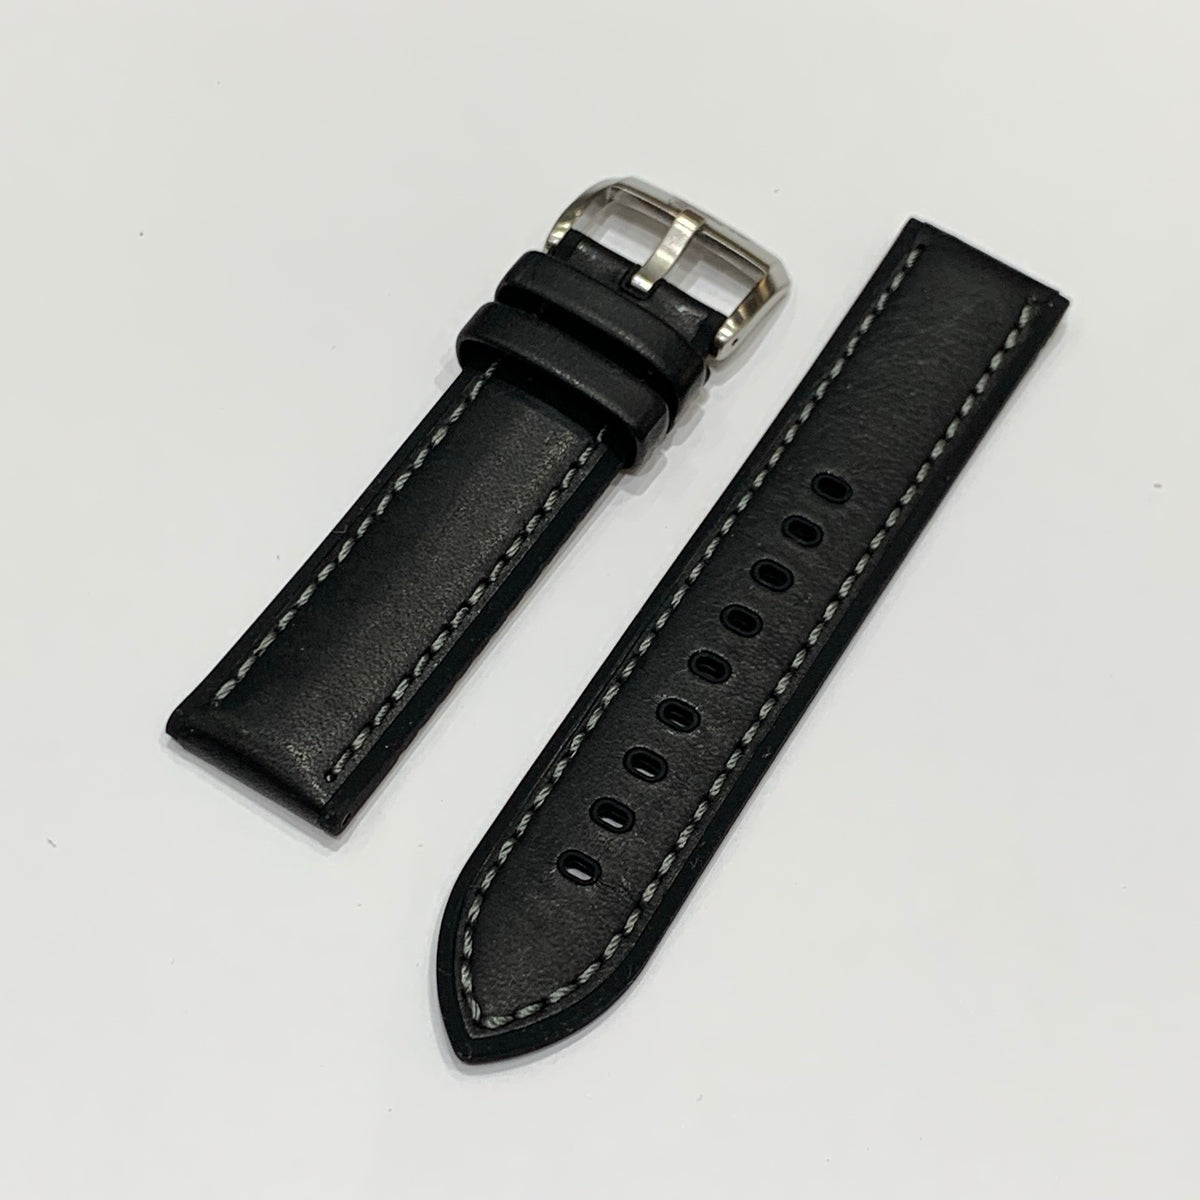 Alpine Watchstrap - Smooth Leather w. Silicone lining